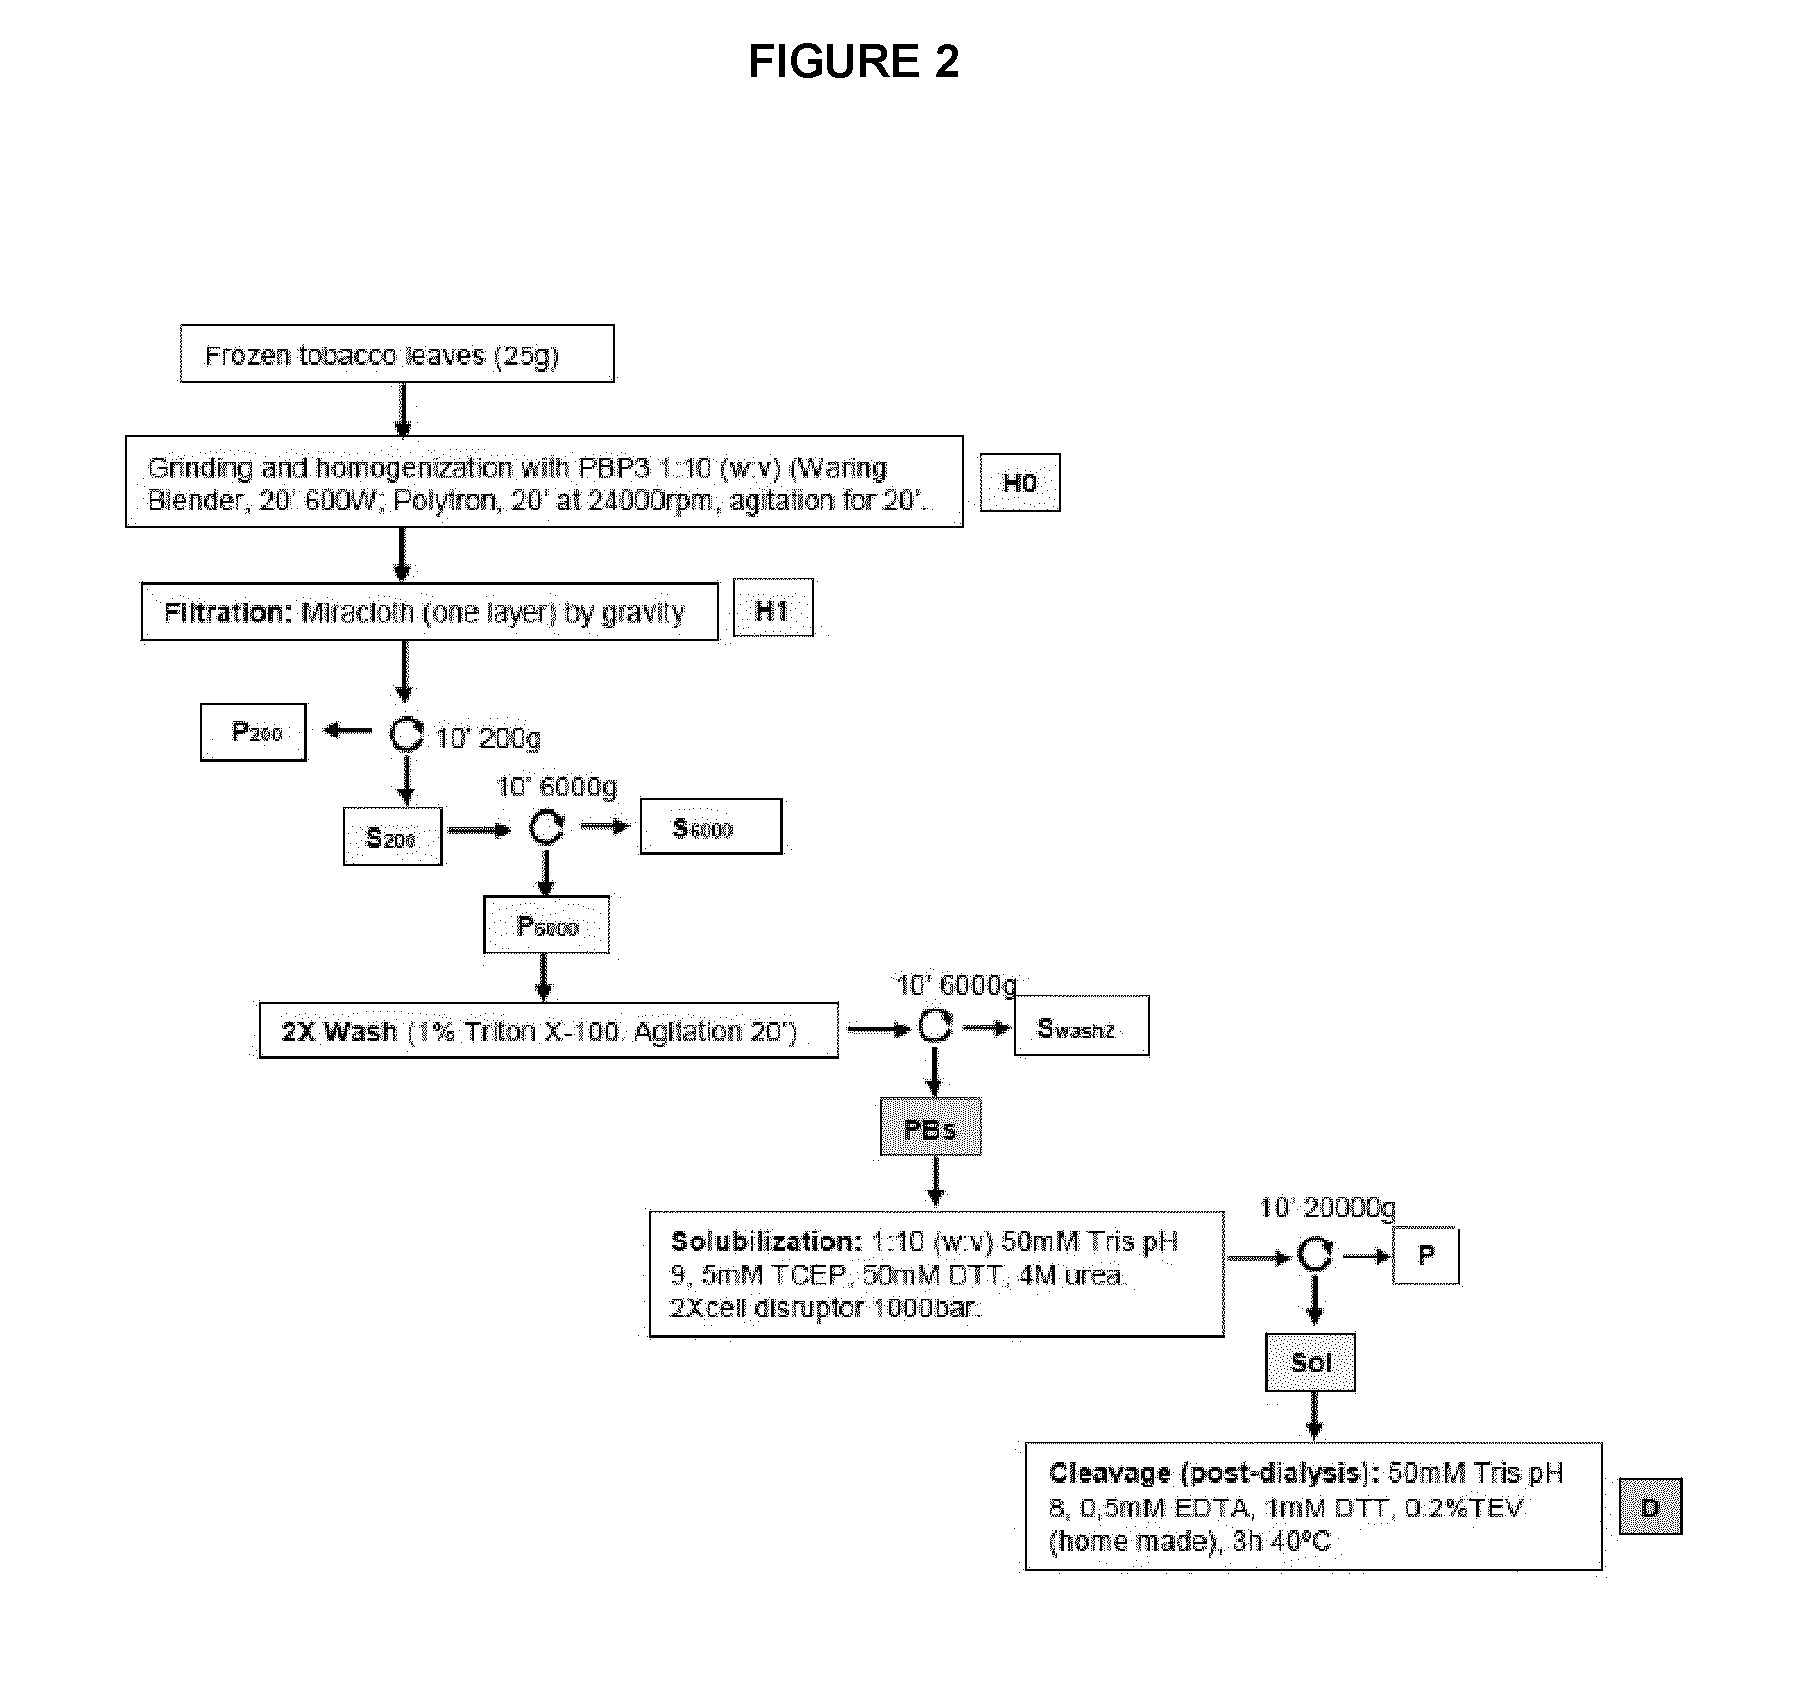 Method for producing mullerian inhibitor substance in plants